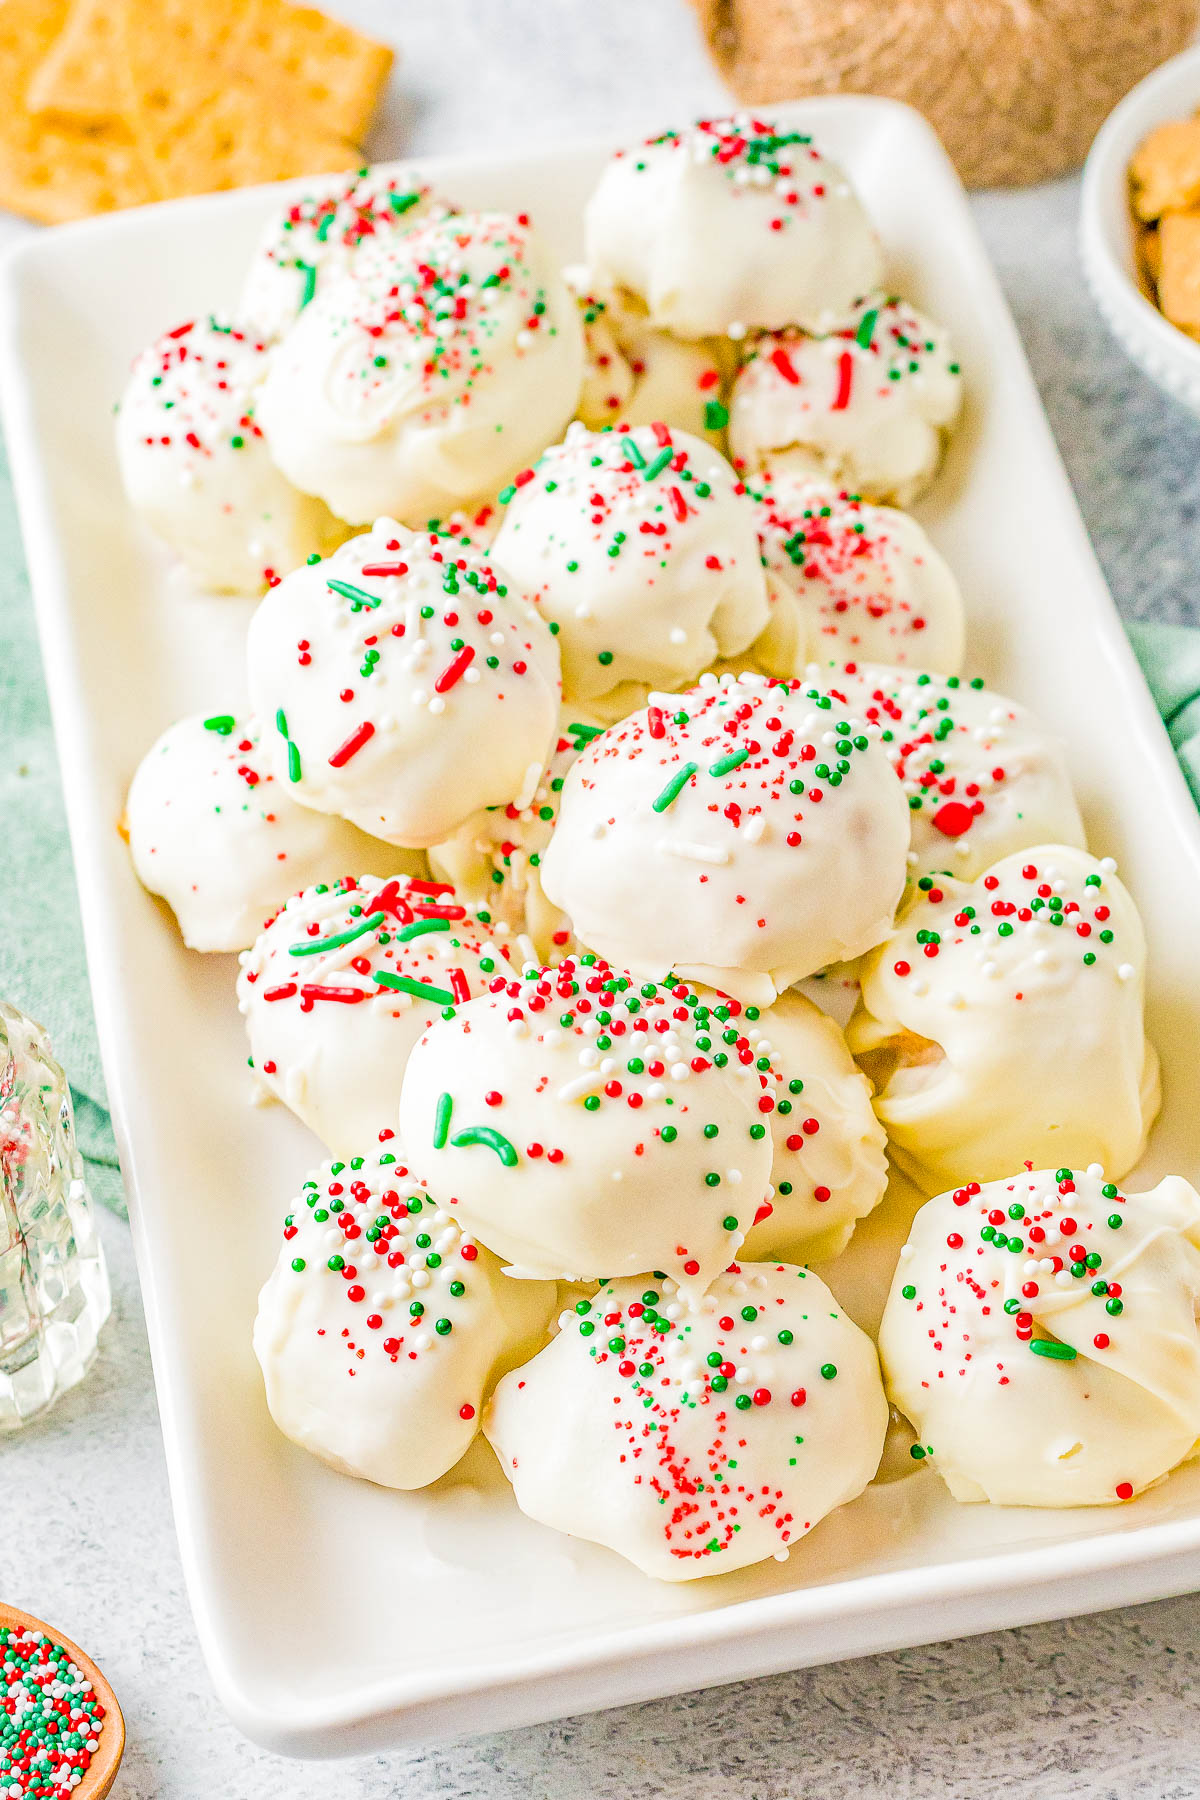 White Chocolate Peanut Butter Truffles - Fast, EASY, no-bake, and the BEST peanut butter truffles! A creamy peanut butter filling with a bit of texture from graham cracker crumbs, dipped in white chocolate (or milk or dark), and topped with sprinkles! Great MAKE-AHEAD homemade hostess gifts, for cookie exchanges, or set them out at Christmas parties.